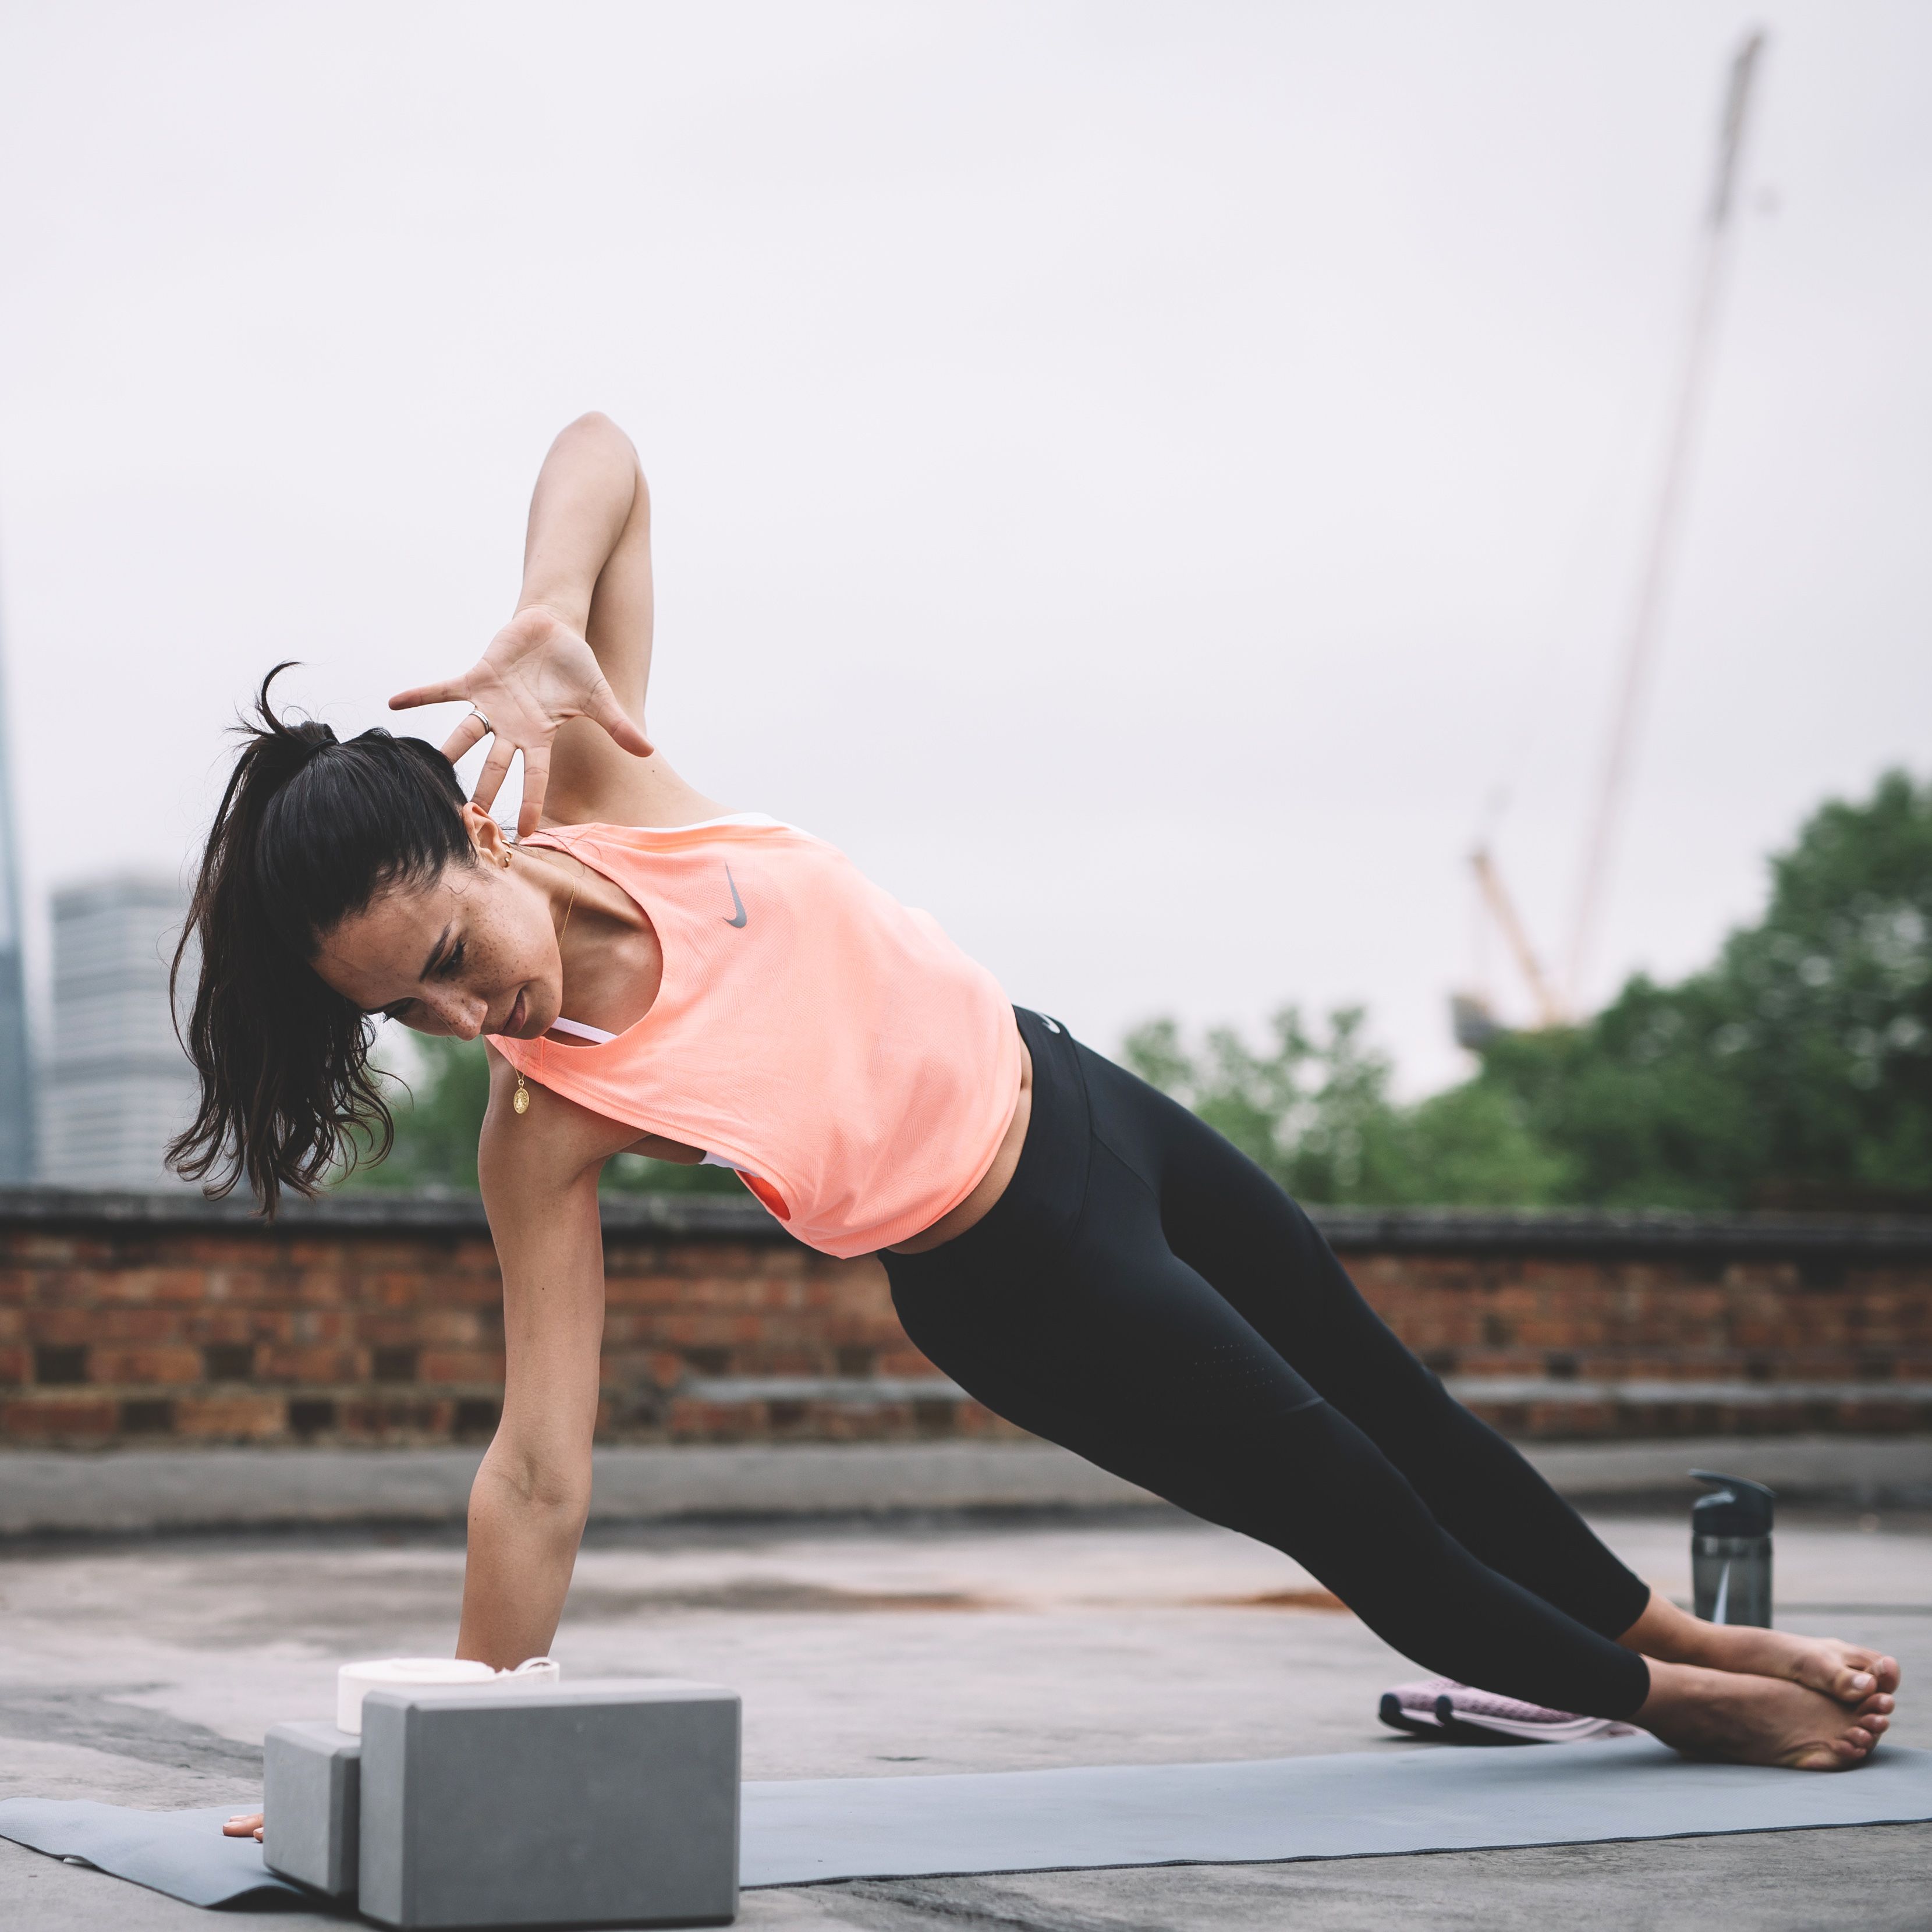 Slim dedicated yogi girl standing on the mat in Lunge with Arm Extended Up  yoga pose. Yoga studio interior. photo – Stretching Image on Unsplash